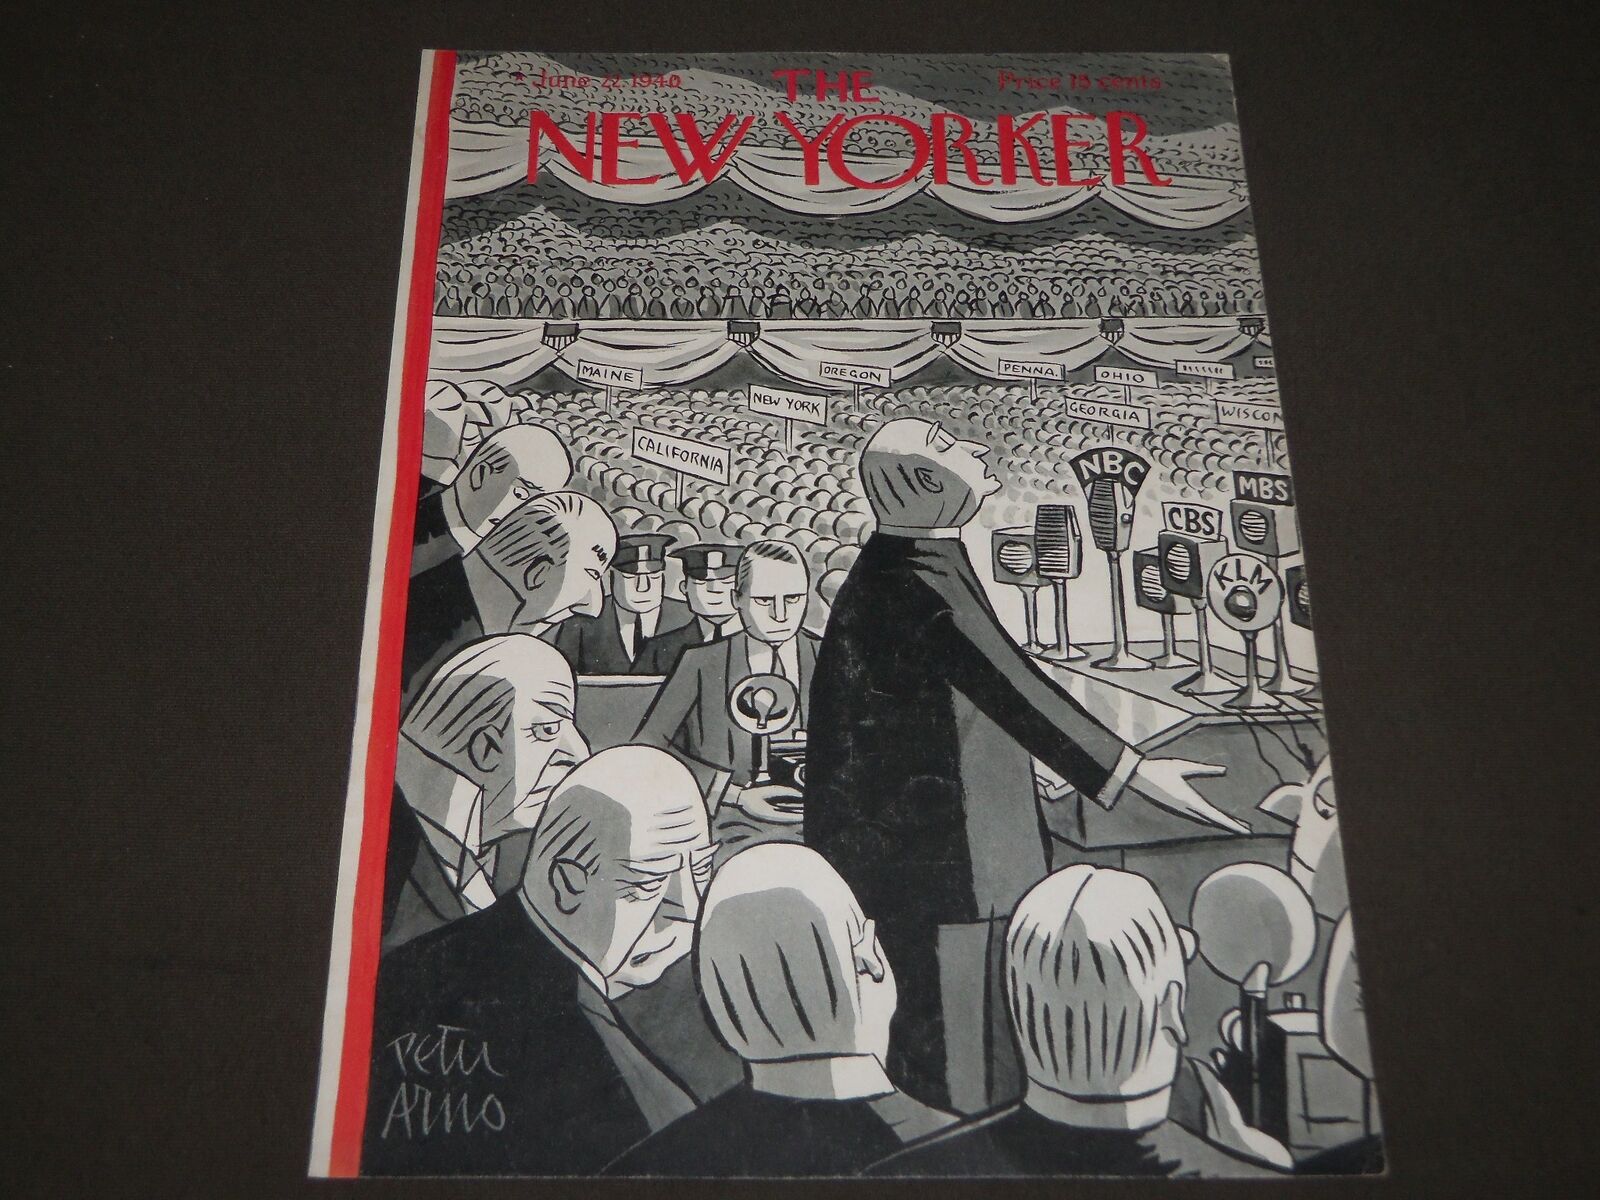 1940 JUNE 22 NEW YORKER MAGAZINE FRONT COVER ONLY - PETER ARNO COVER